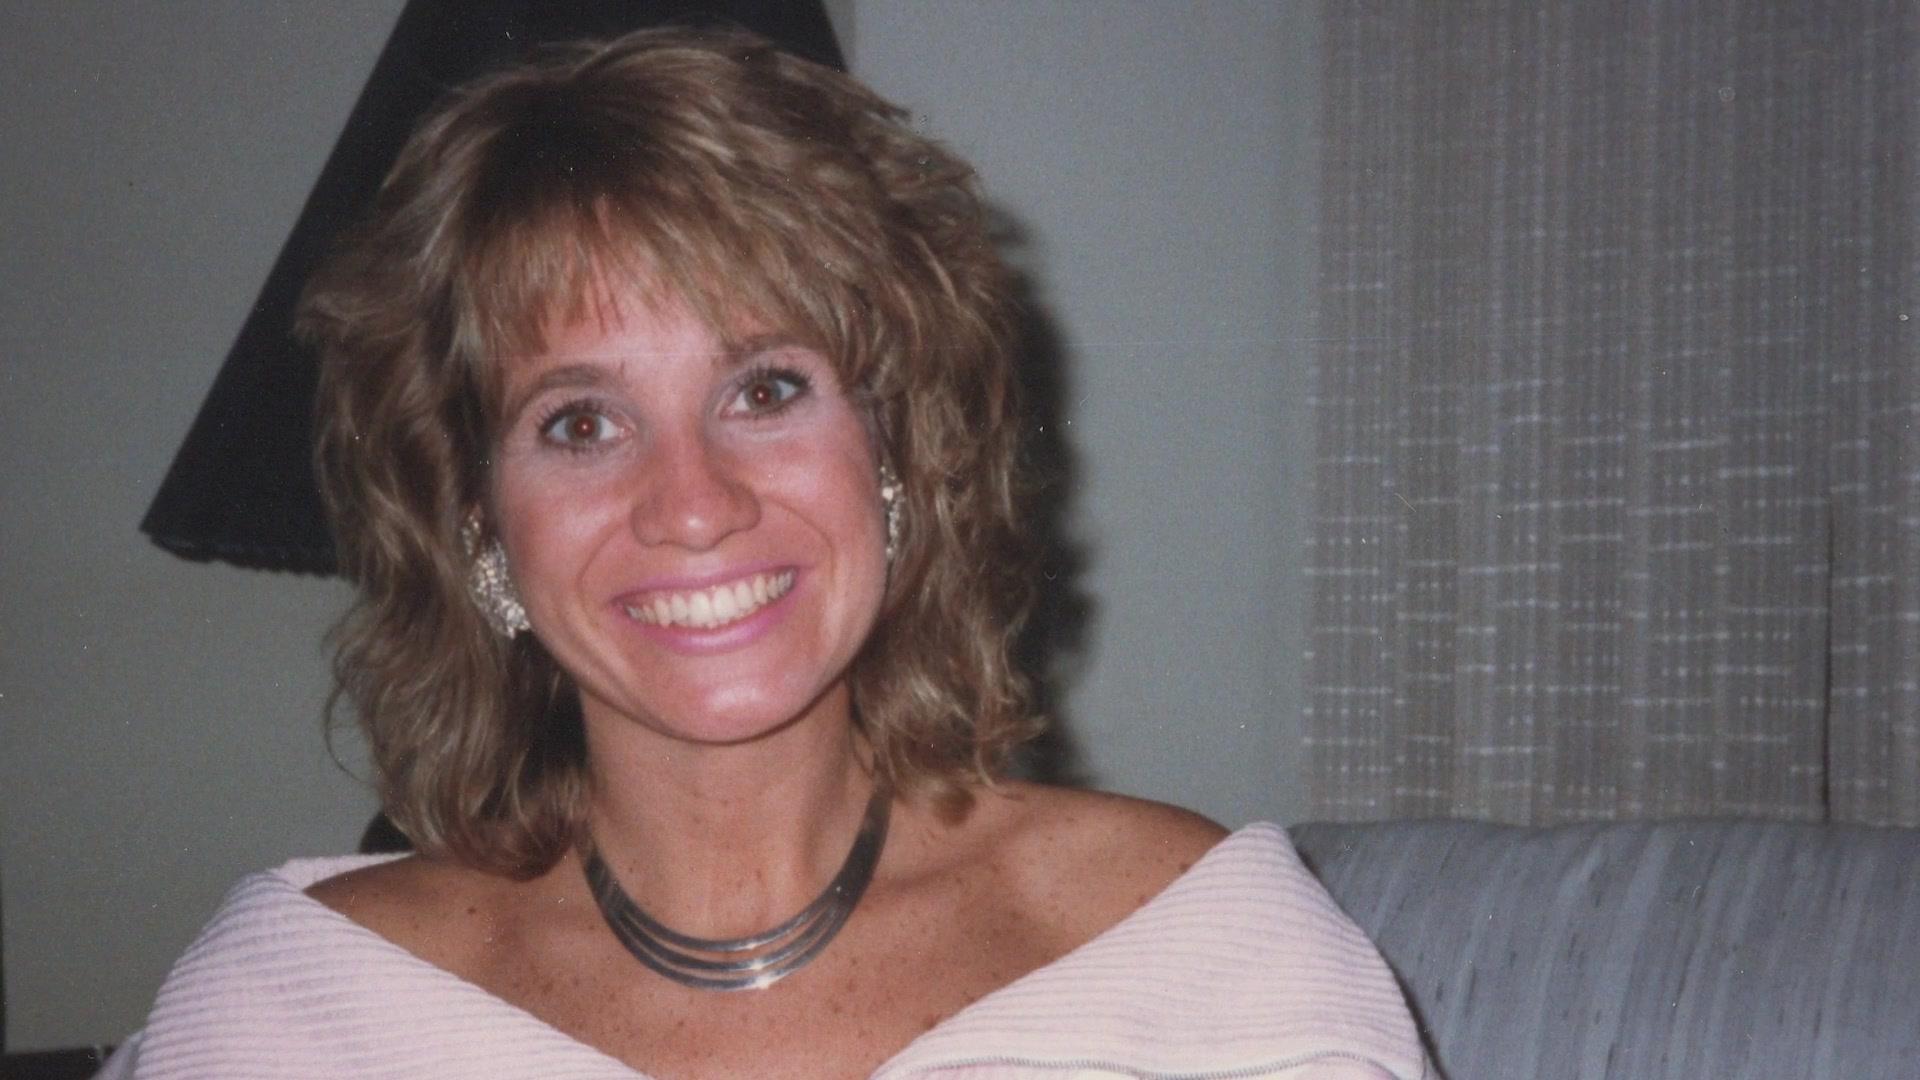 Carolyn Warmus Maintains Innocence in Fatal Attraction Murder. What Does Her Life Look Like After Being Released from Prison?